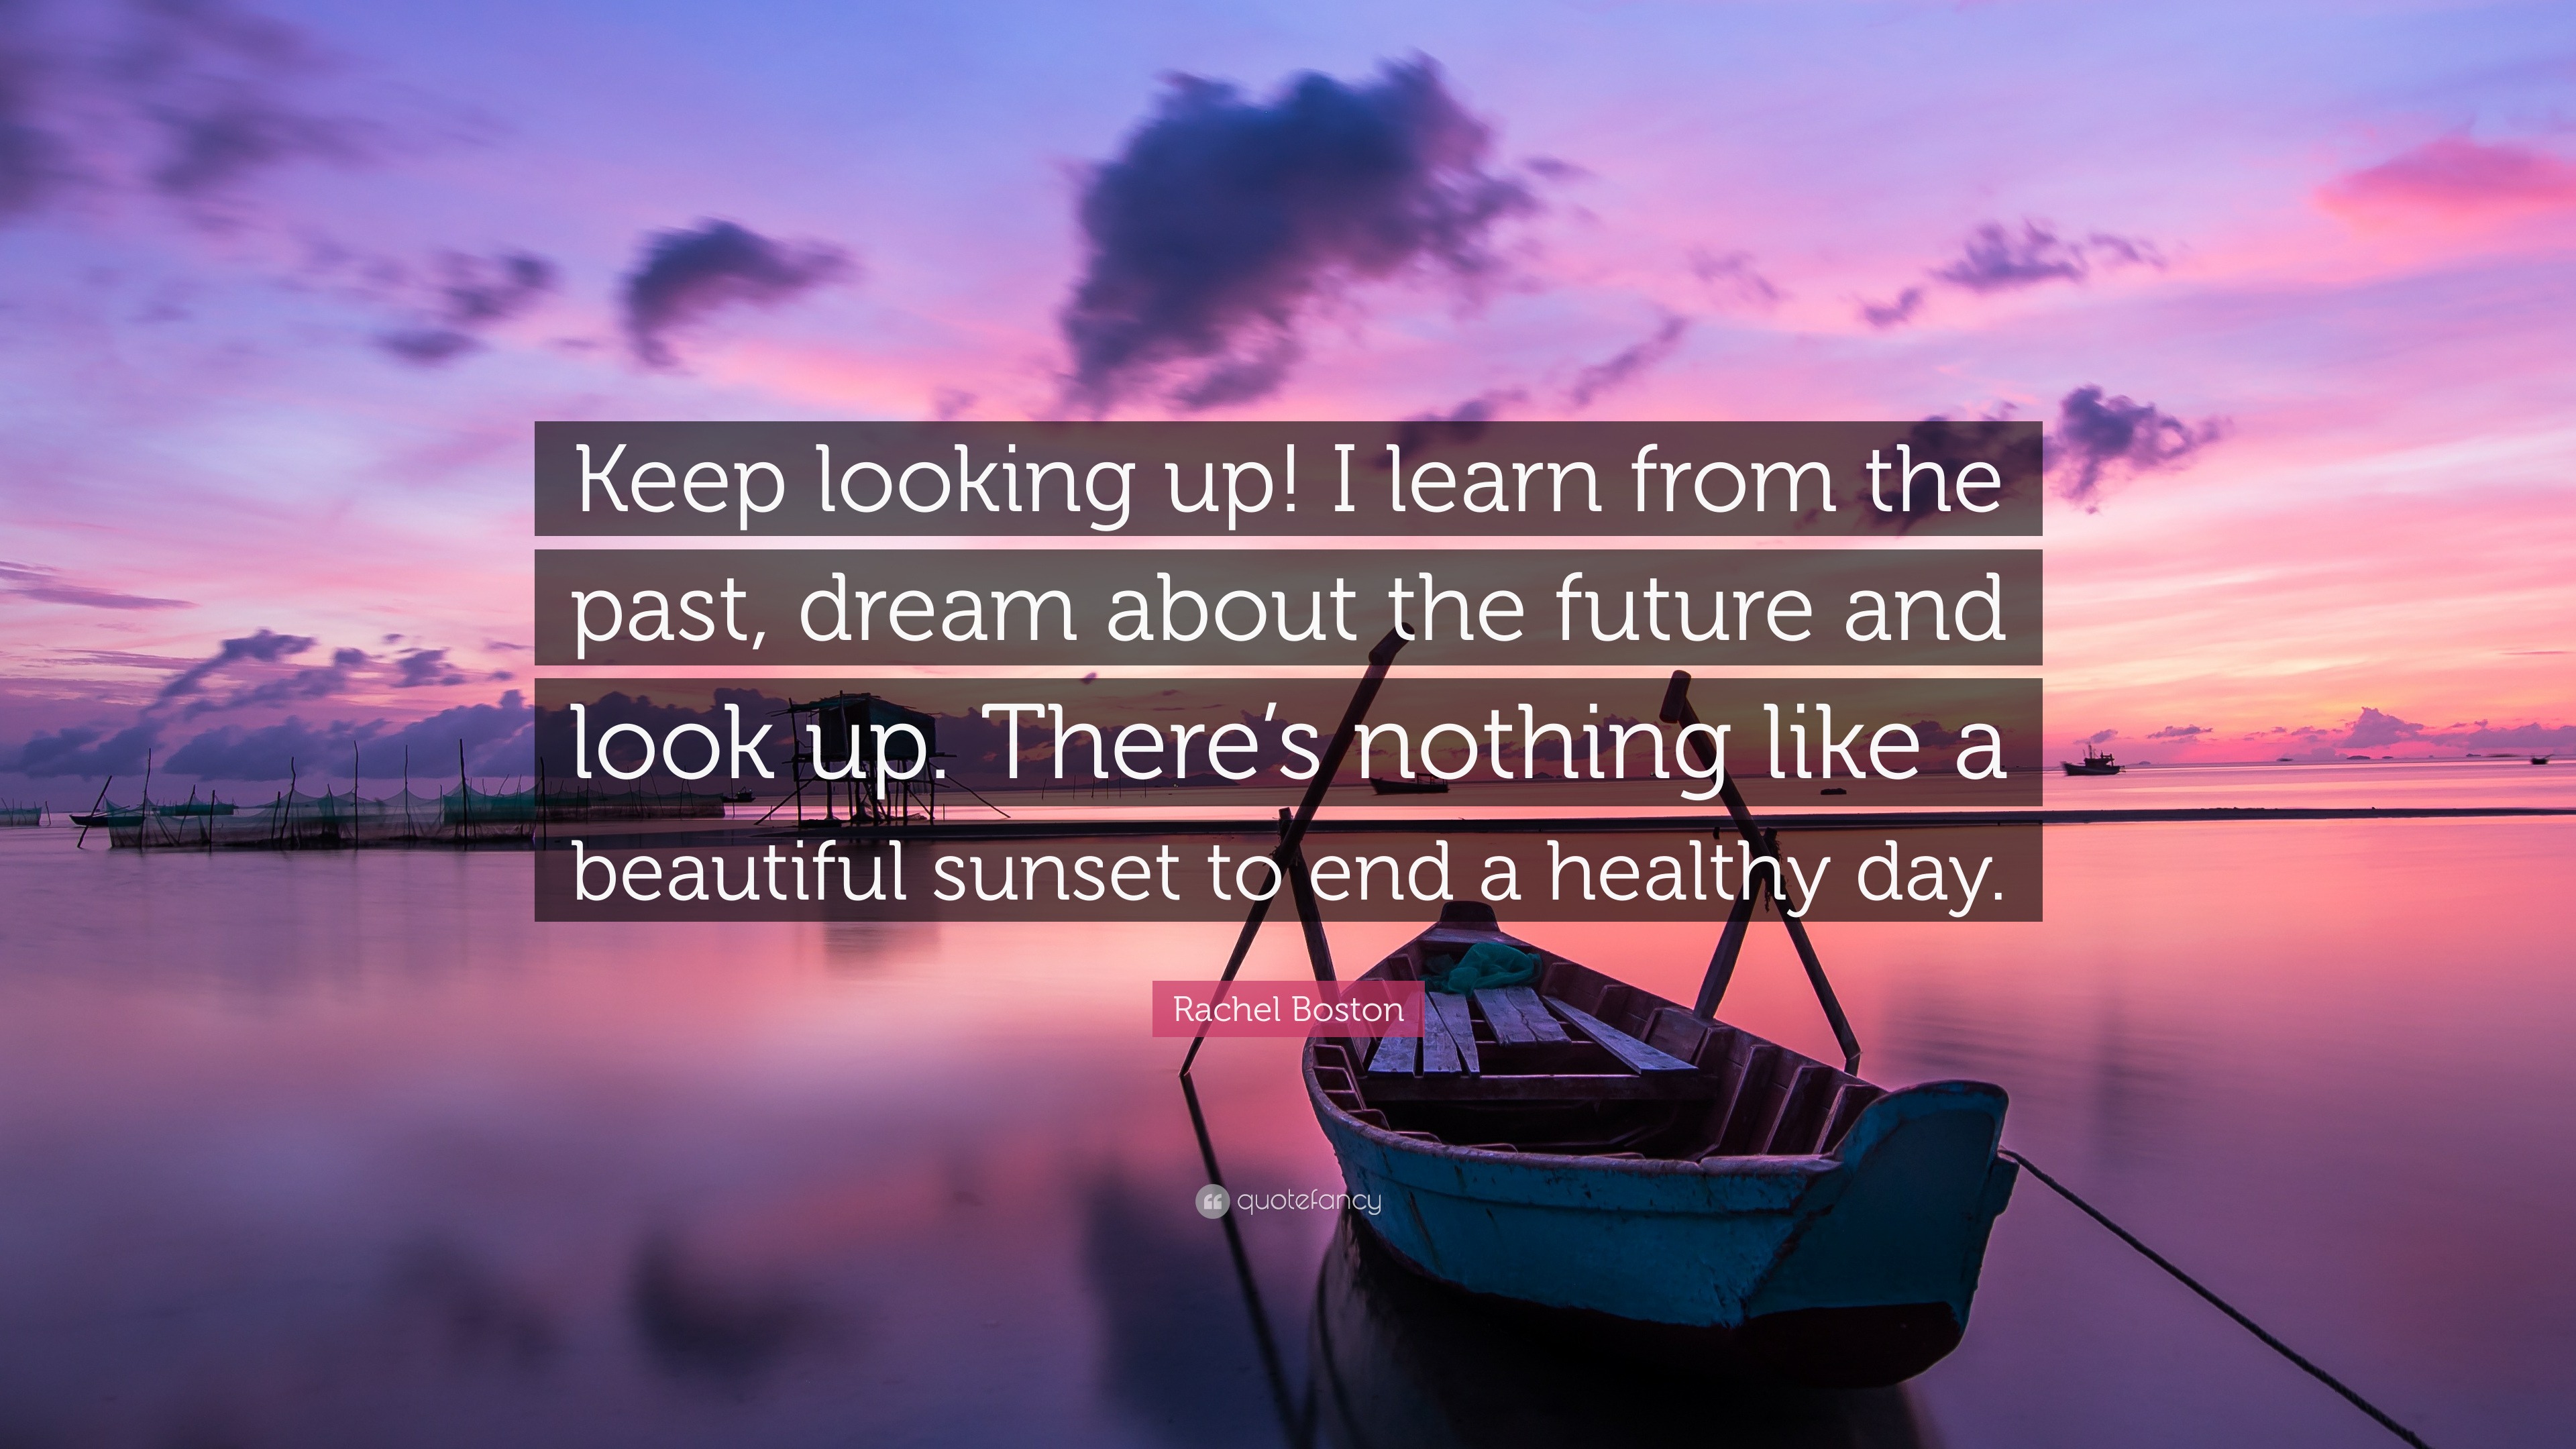 Rachel Boston Quote Keep Looking Up I Learn From The Past Dream About The Future And Look Up There S Nothing Like A Beautiful Sunset To E